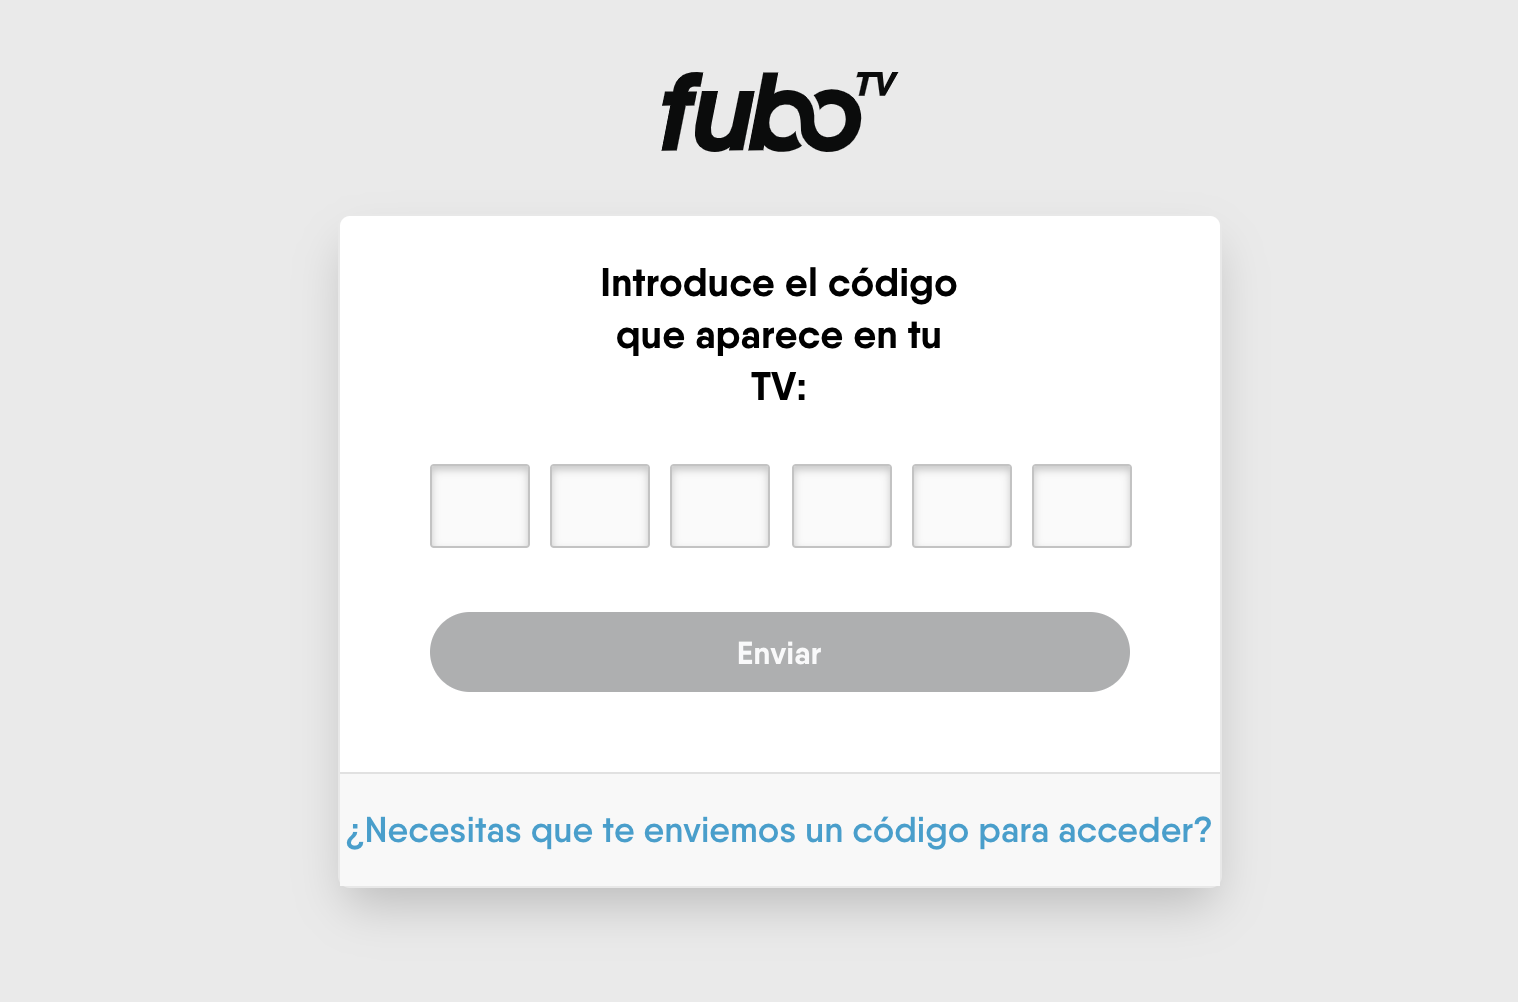 fubotv connect with code